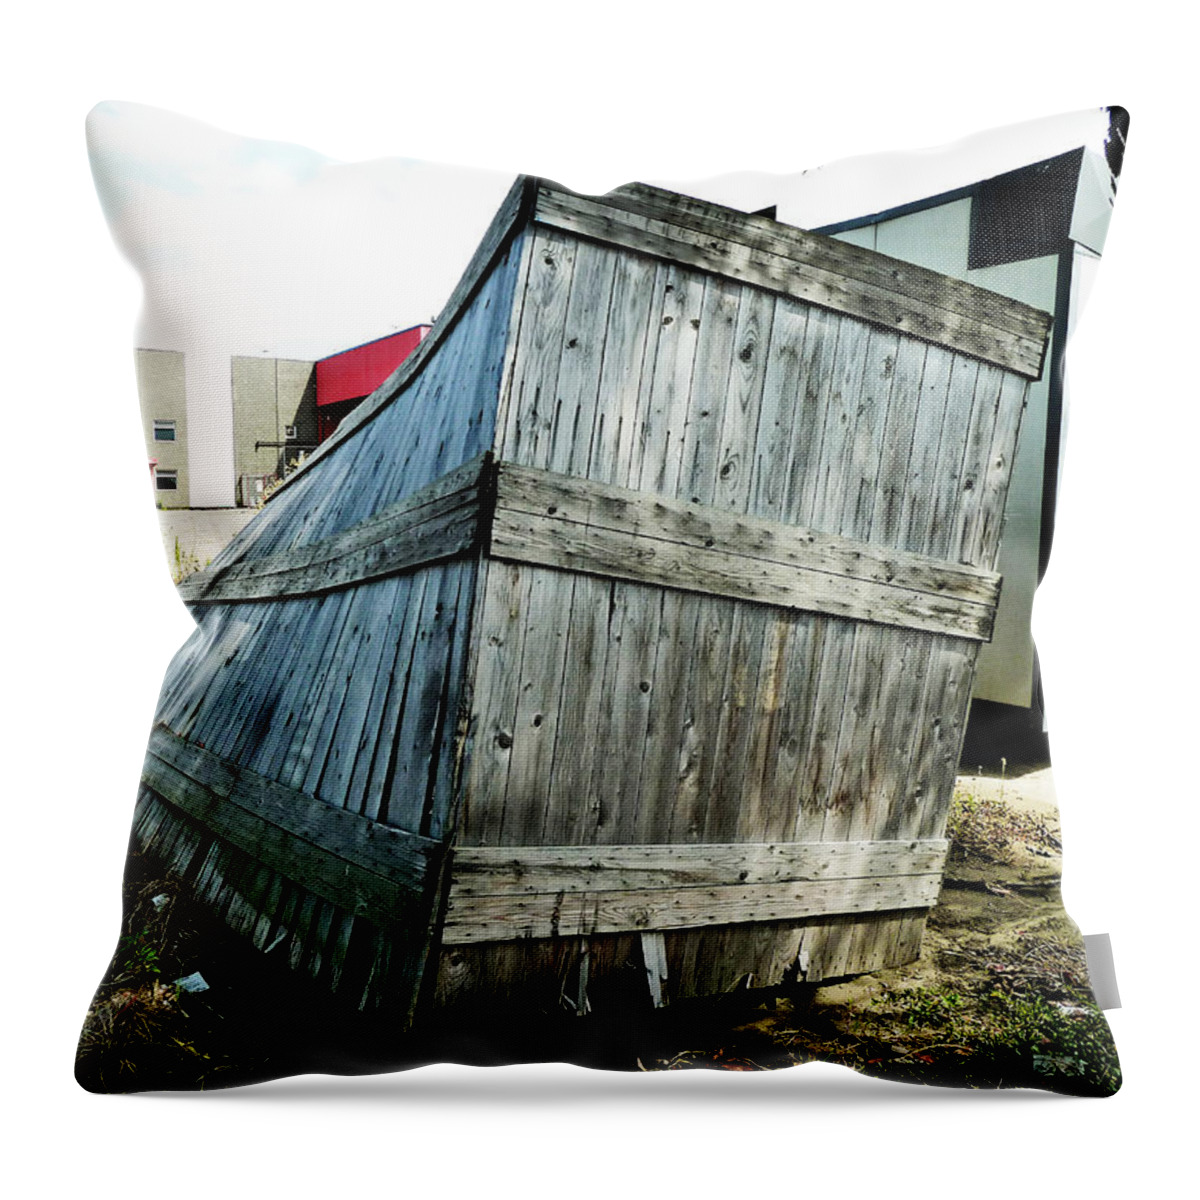 Leaning Throw Pillow featuring the photograph The Winner in the Leaning Contest by Steve Taylor